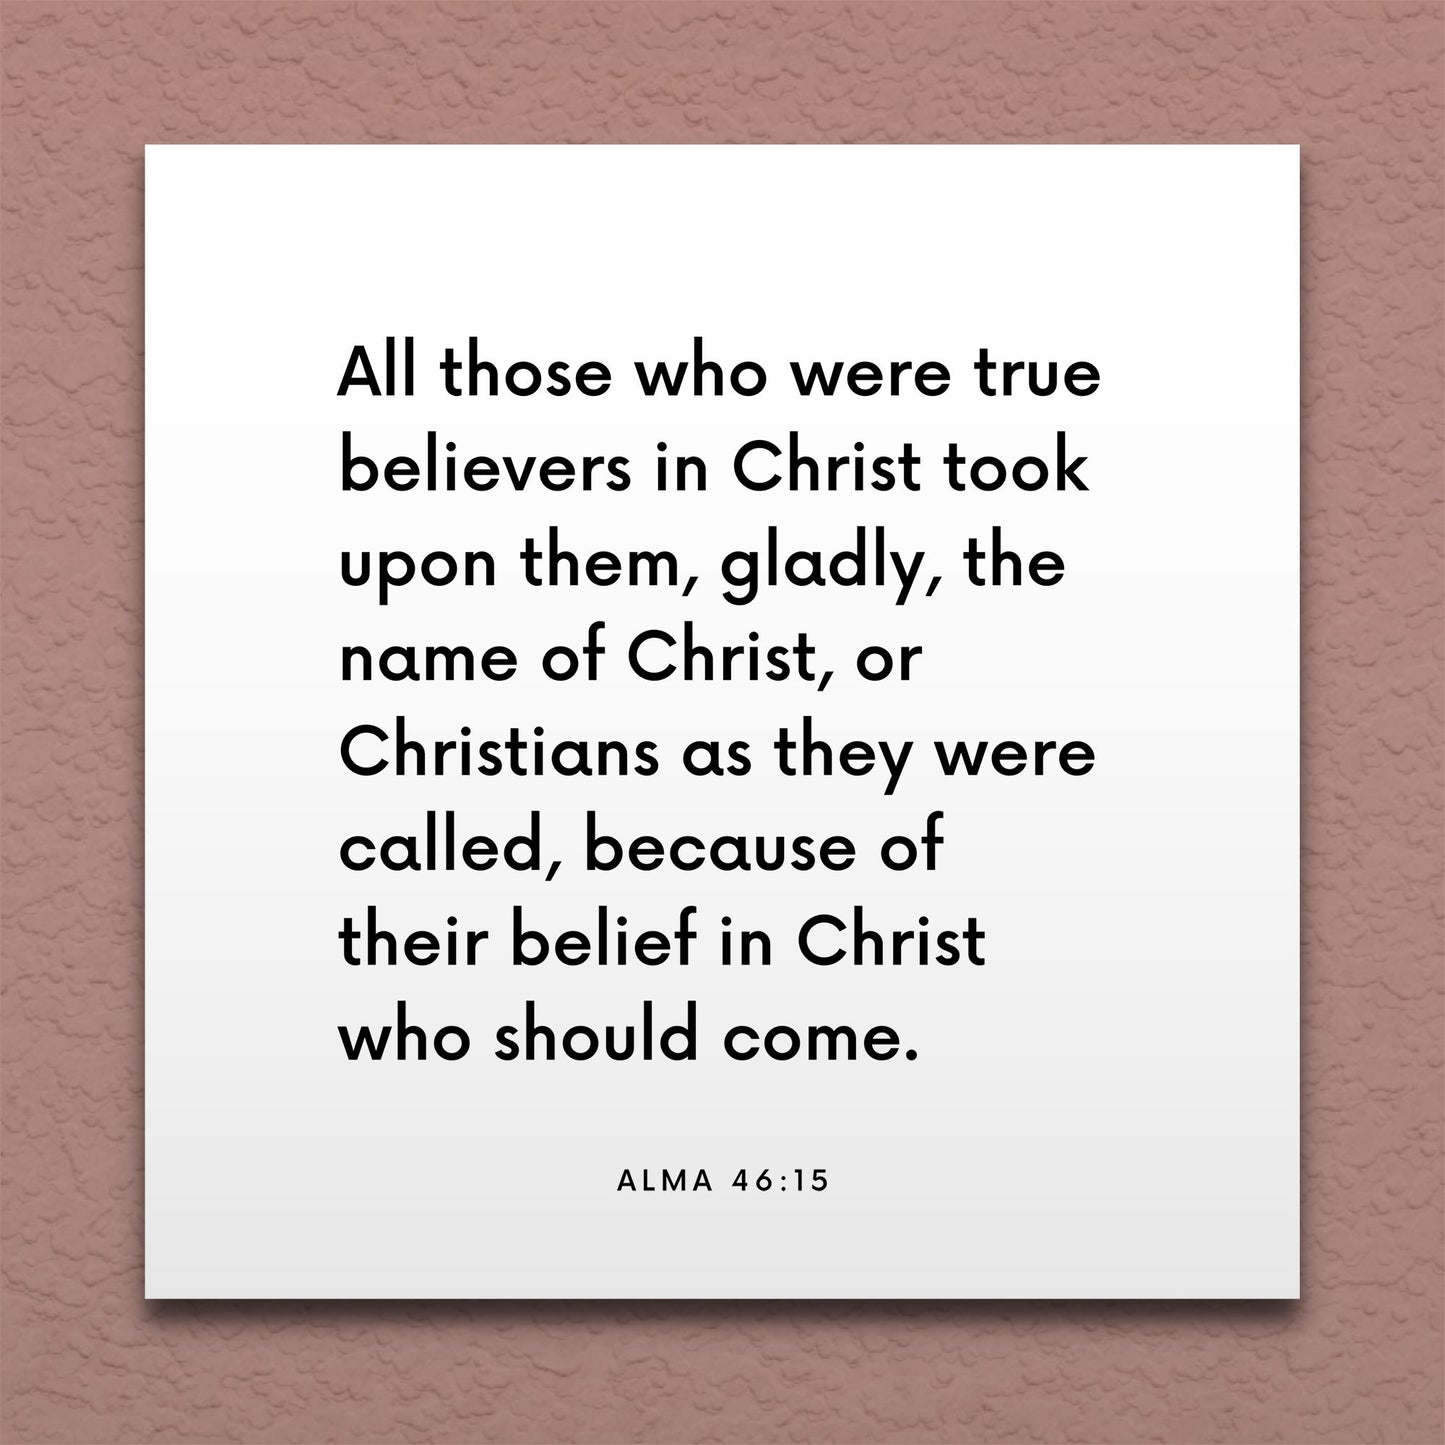 Wall-mounted scripture tile for Alma 46:15 - "All those who were true believers in Christ"